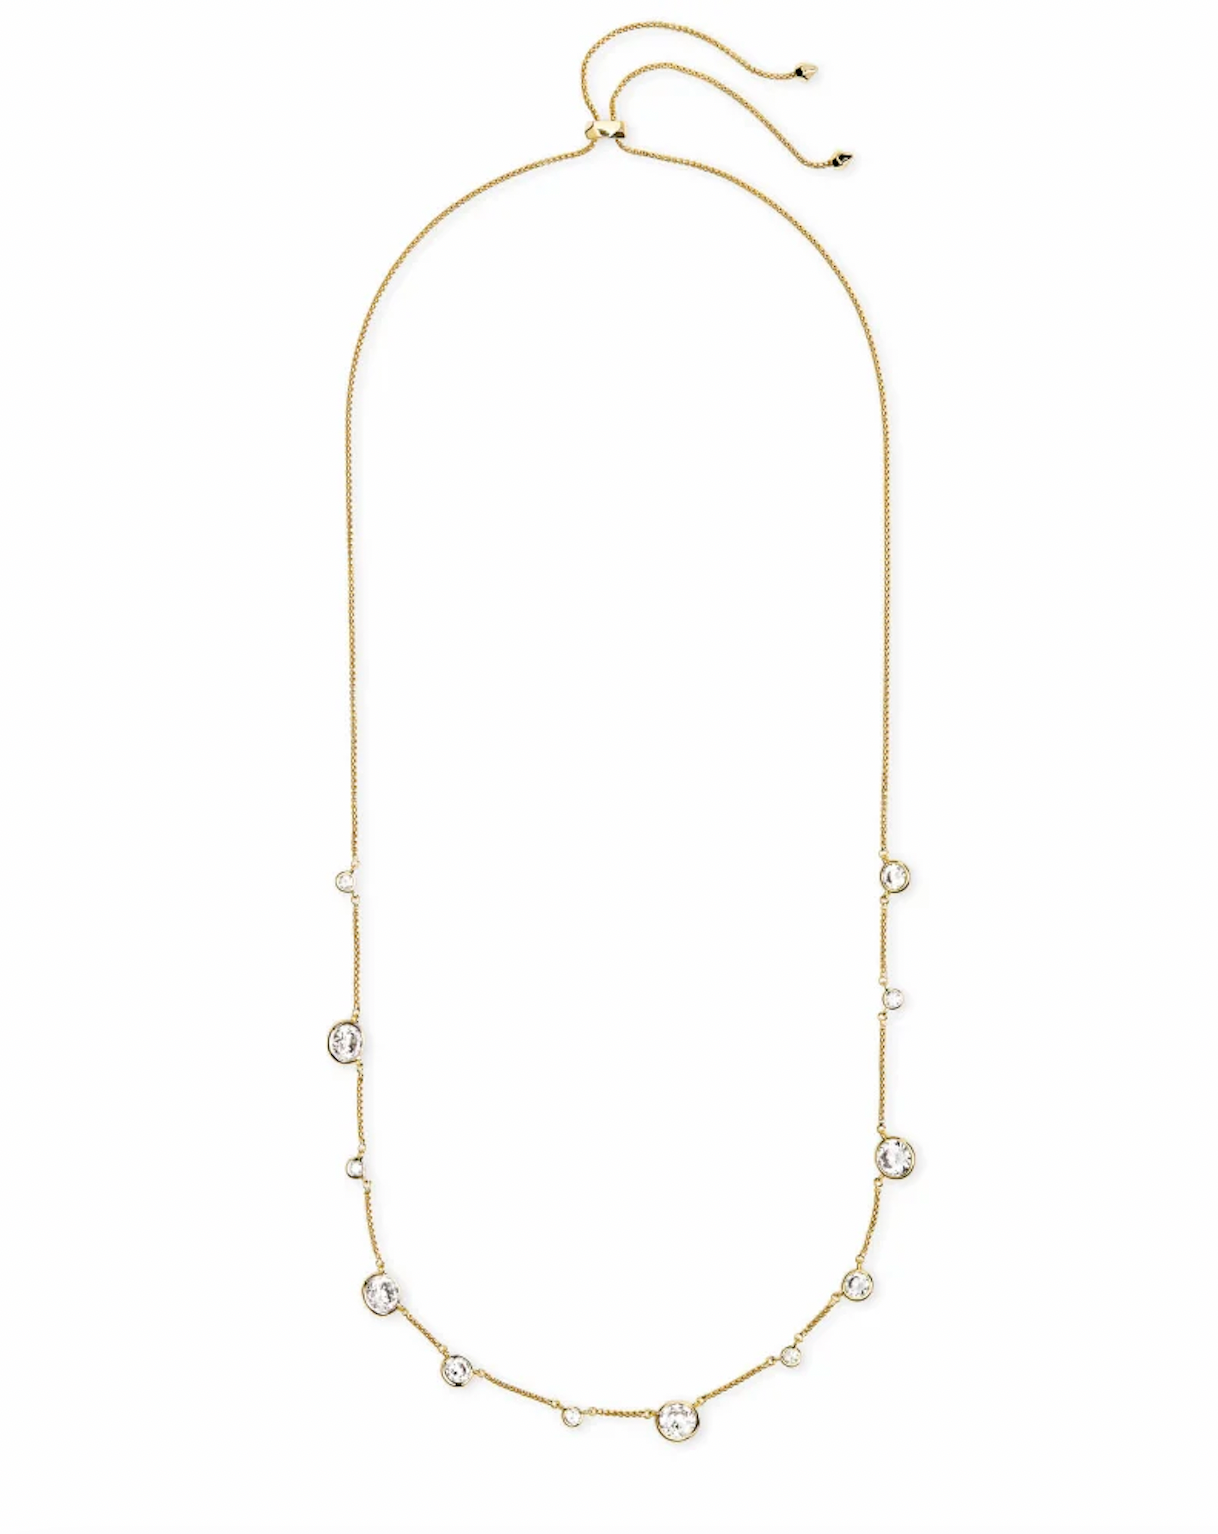 KENDRA SCOTT CLEMENTINE NECKLACE GOLD METAL WHITE